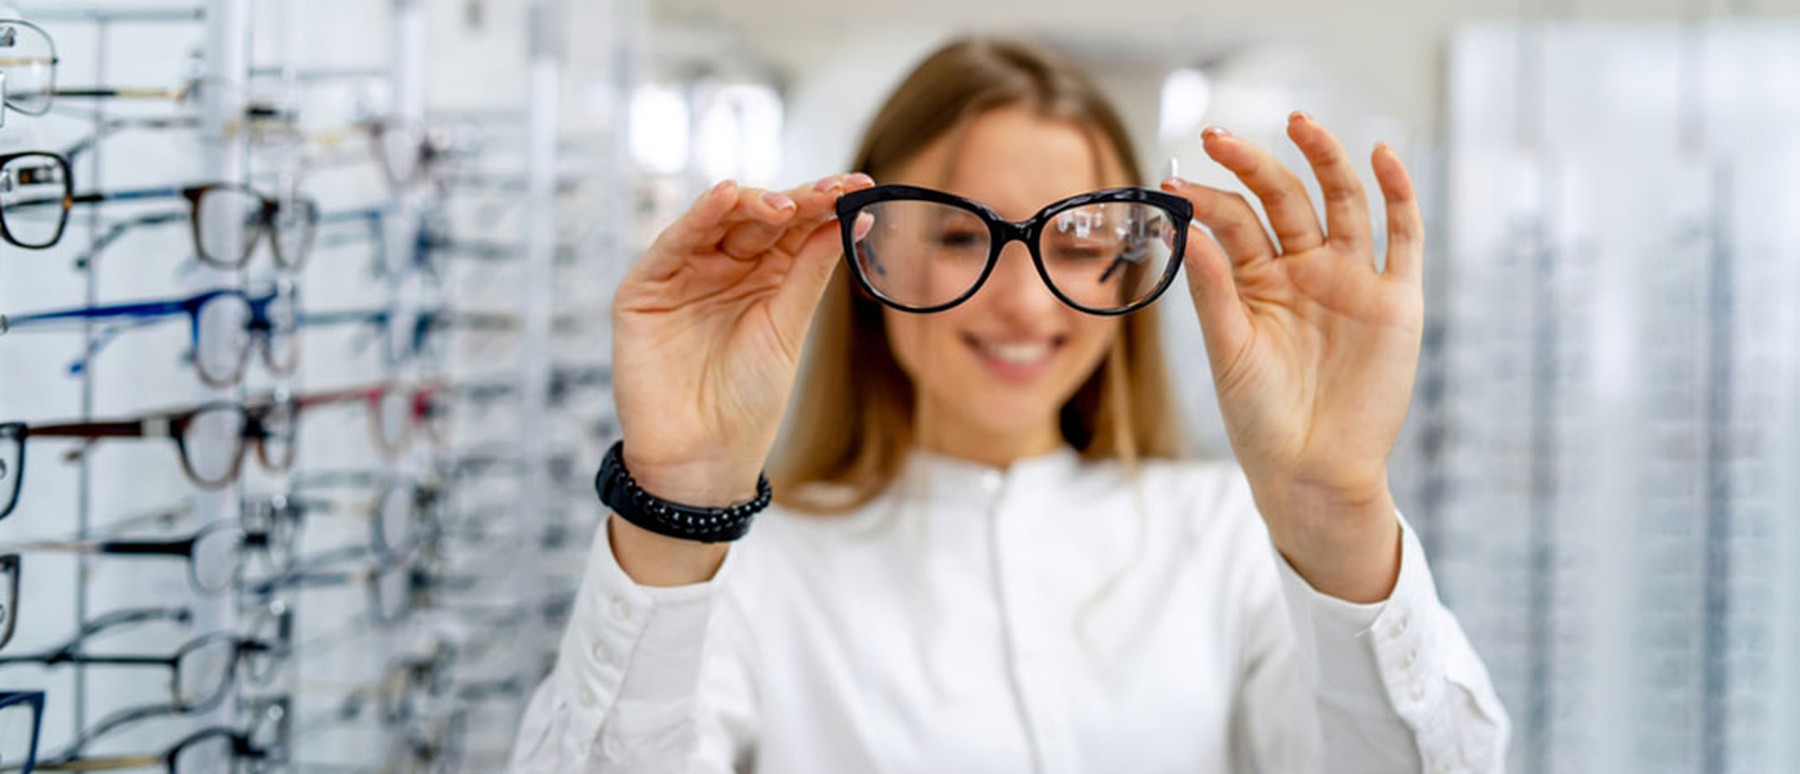 Young woman holding up eyeglasses